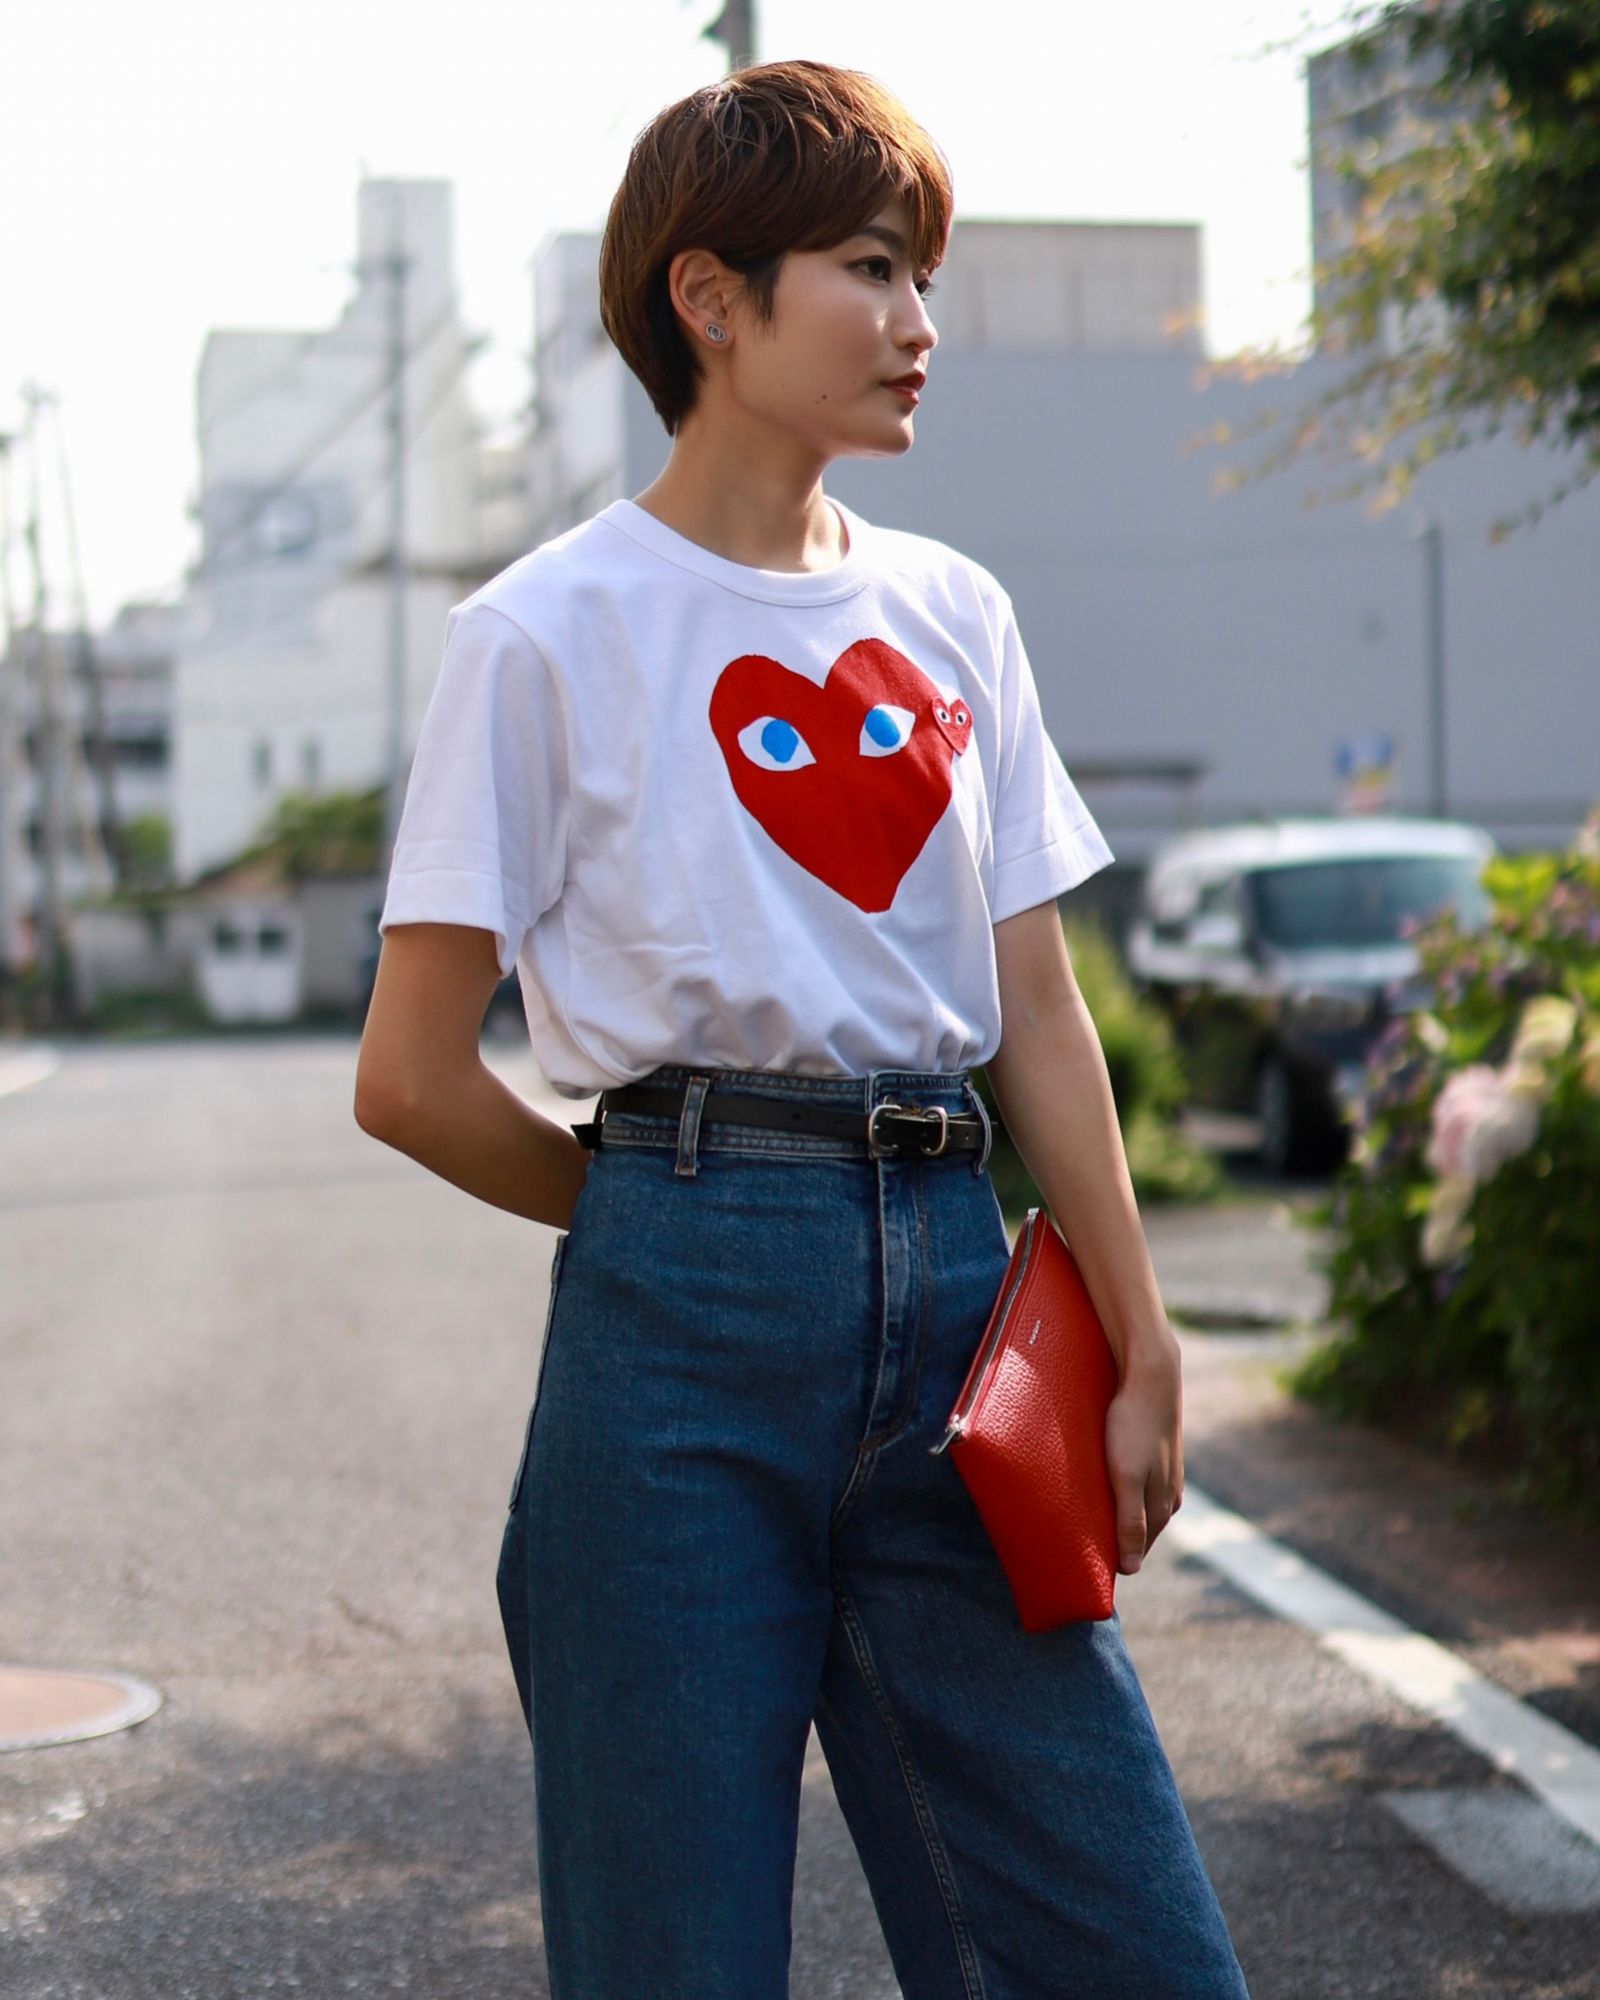 PLAY COMME des GARCONS - プレイ コムデギャルソン | 正規取扱店 ...